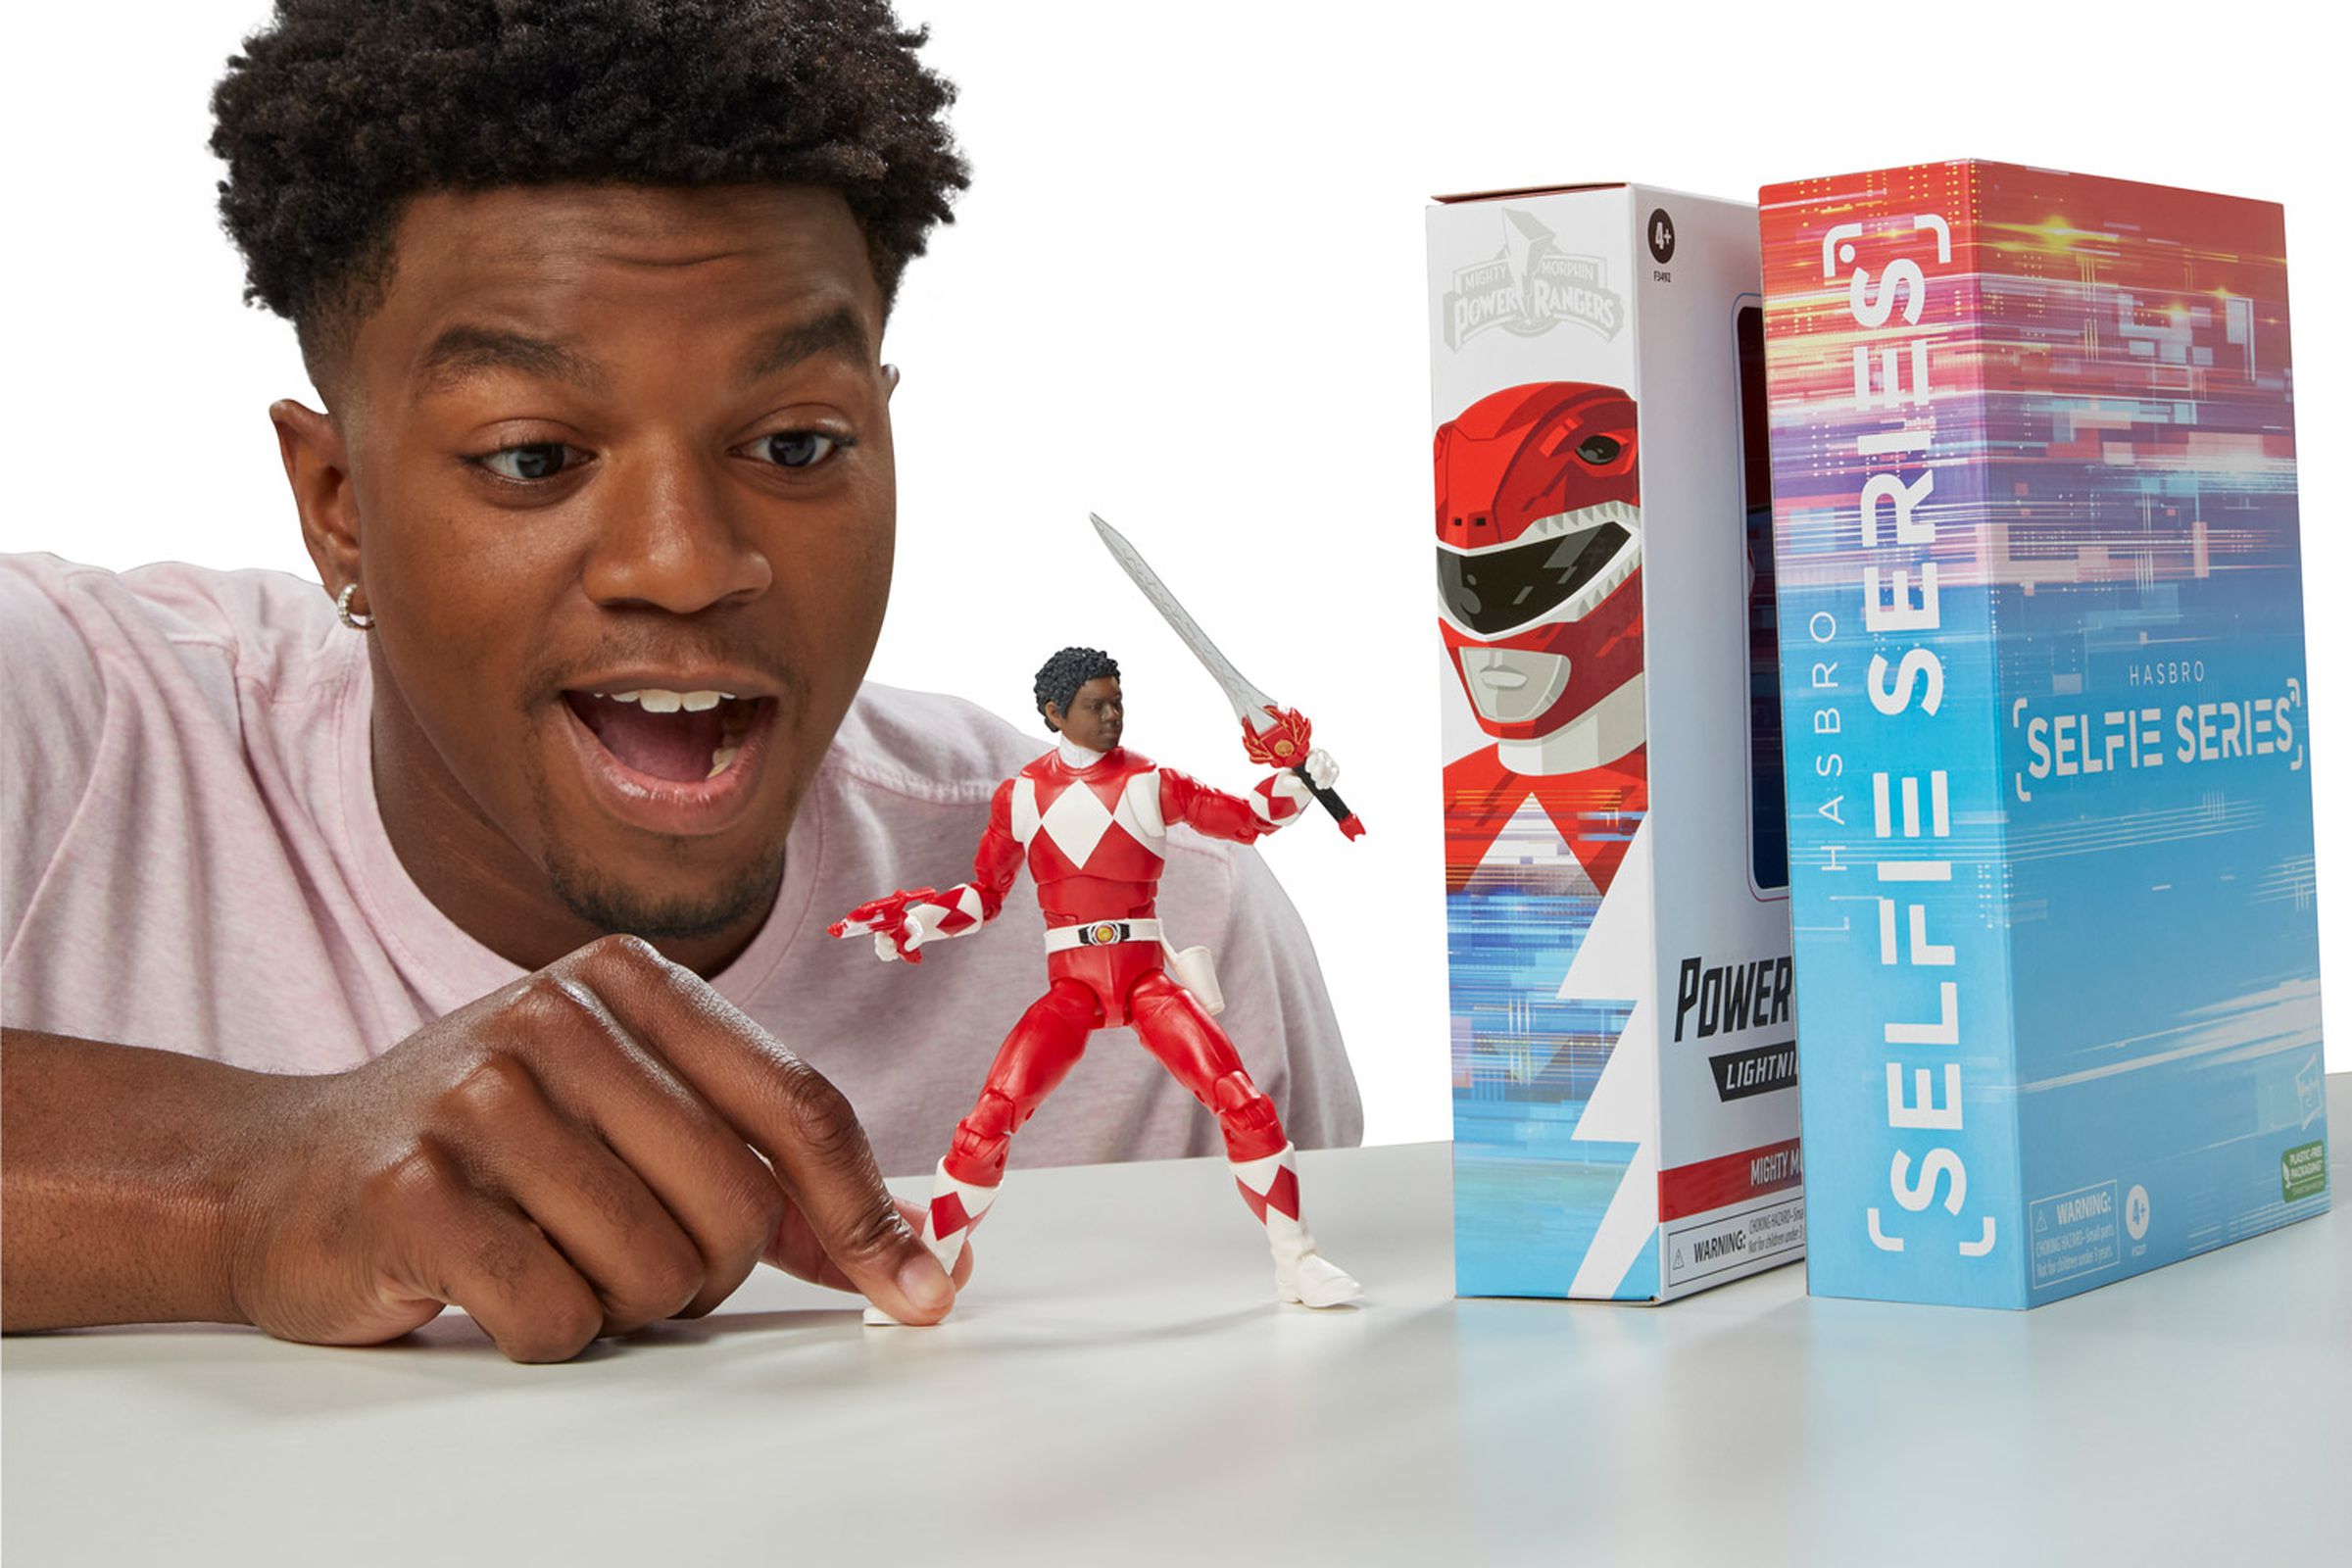 You can make a Red Ranger or a Pink Ranger; hopefully the other colors will materialize by launch.